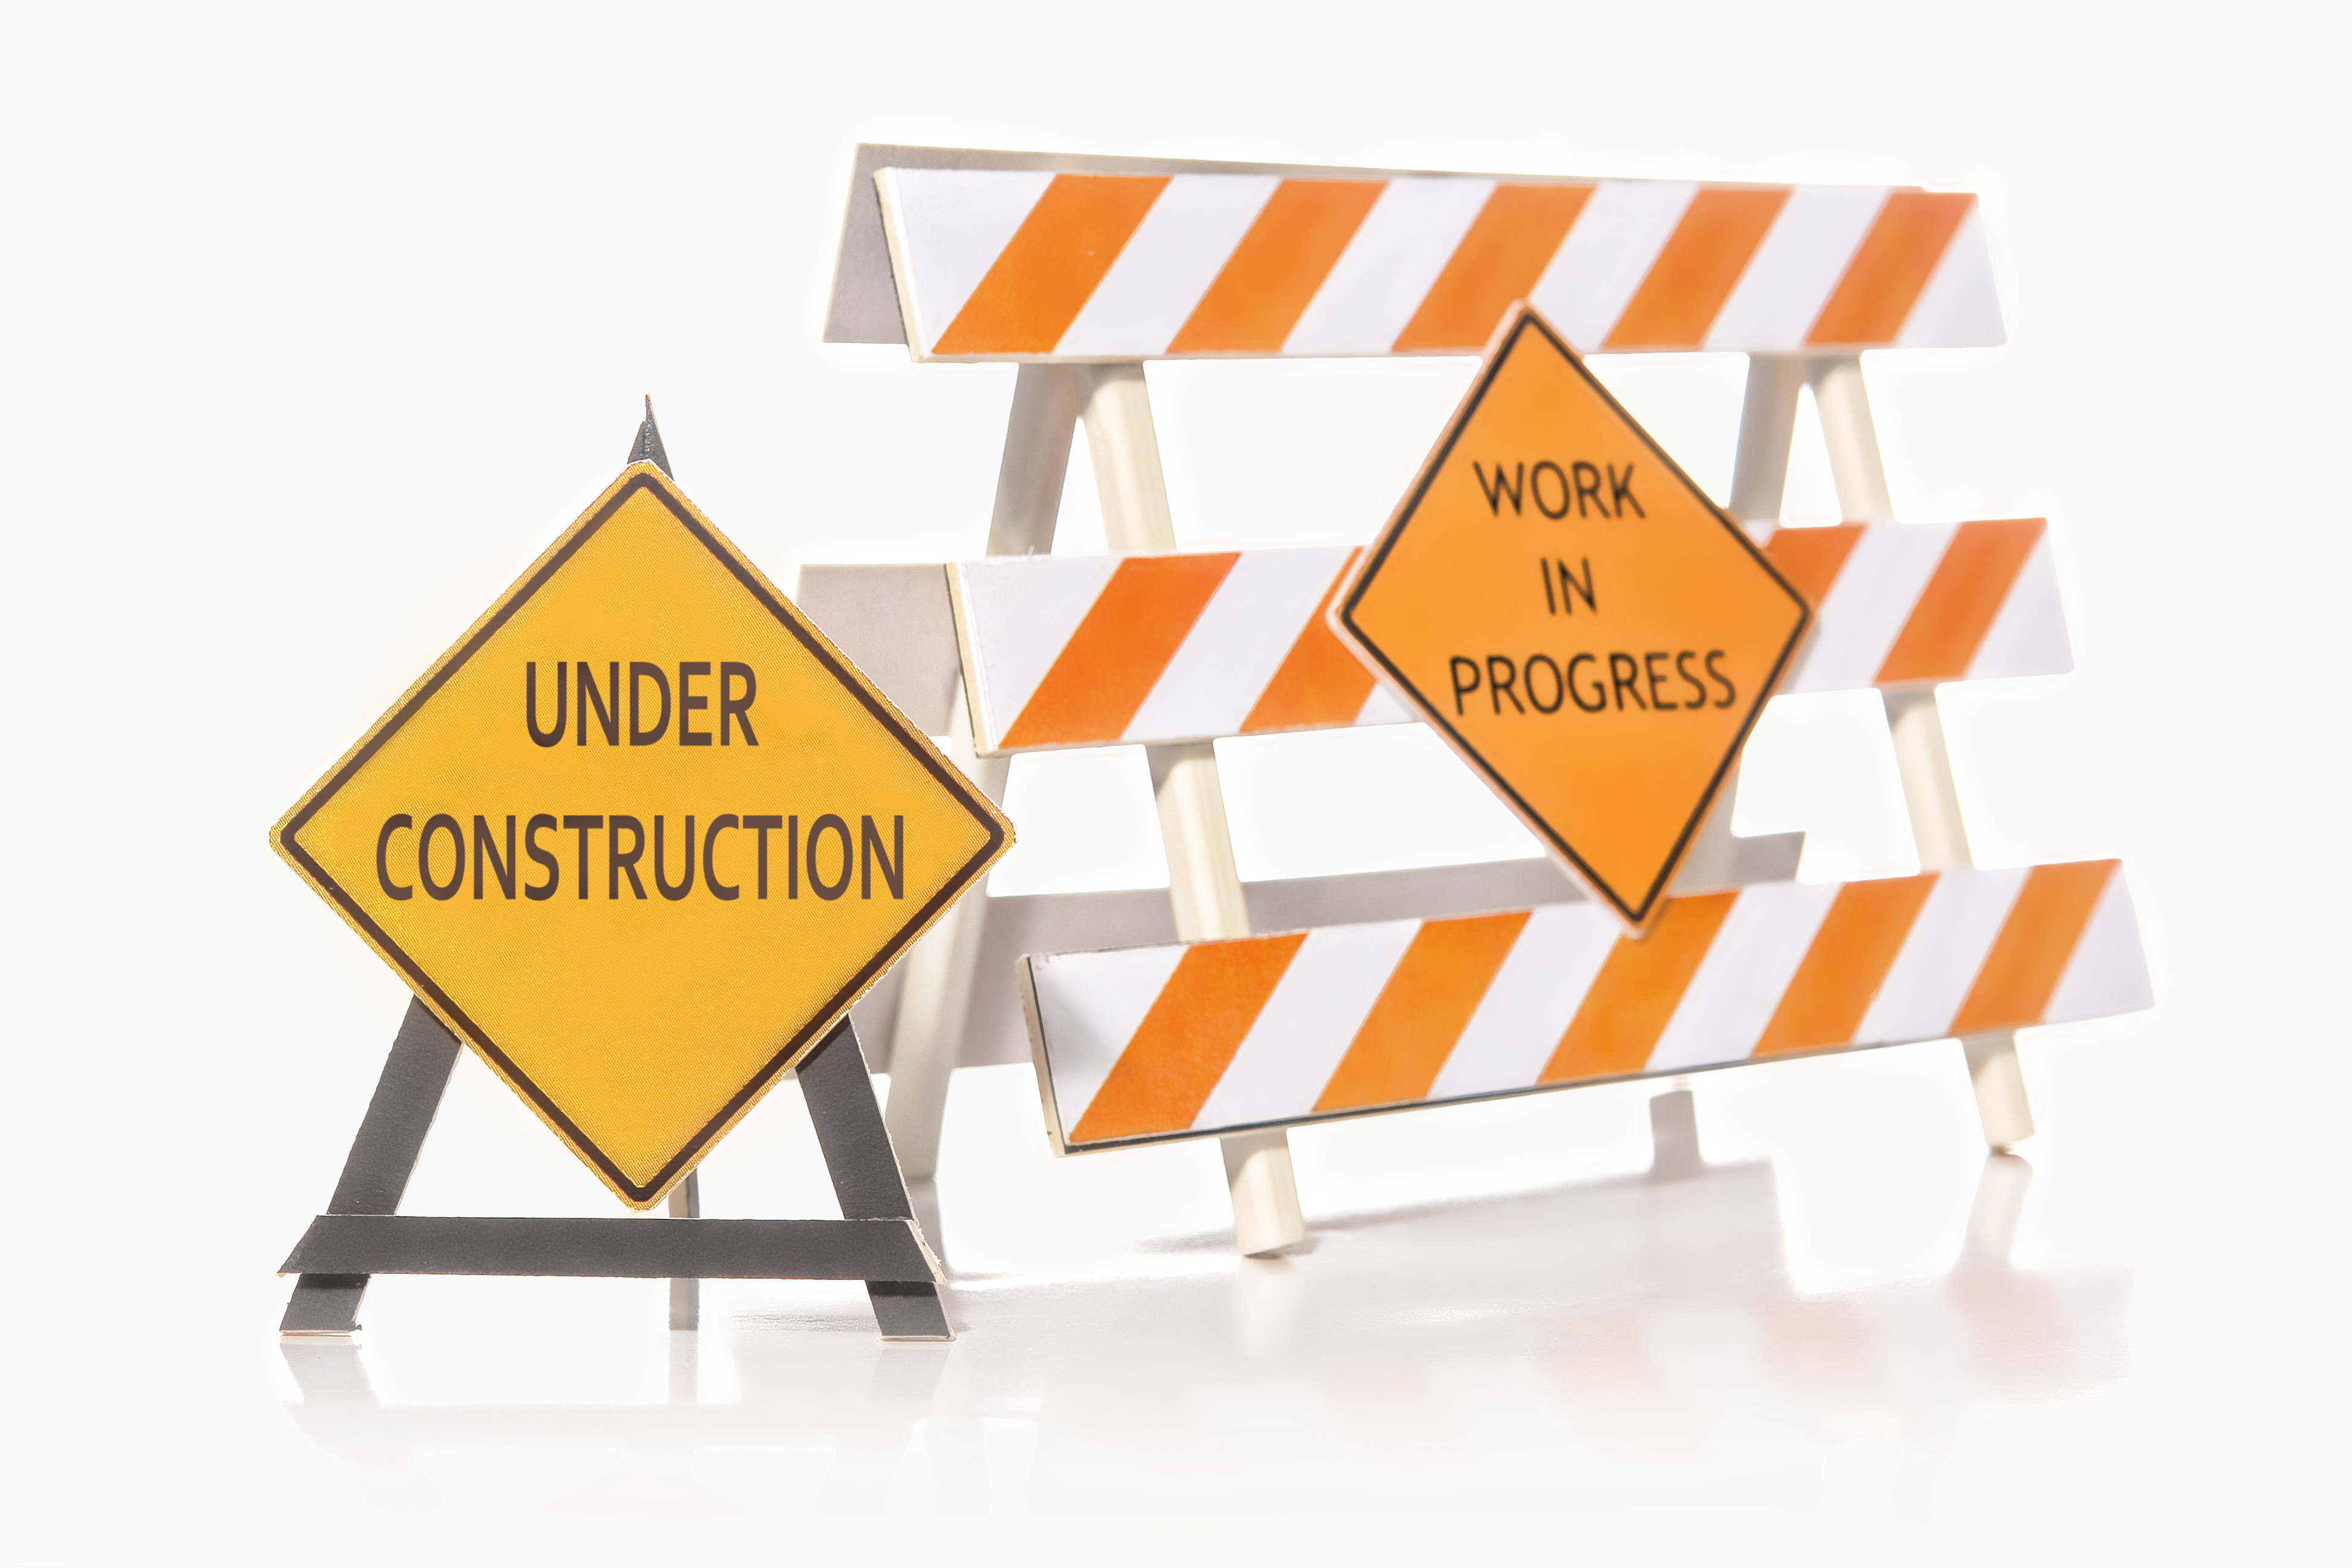 Construction,Warning,Barriers,With,Work,In,Progress,And,Under,Construction